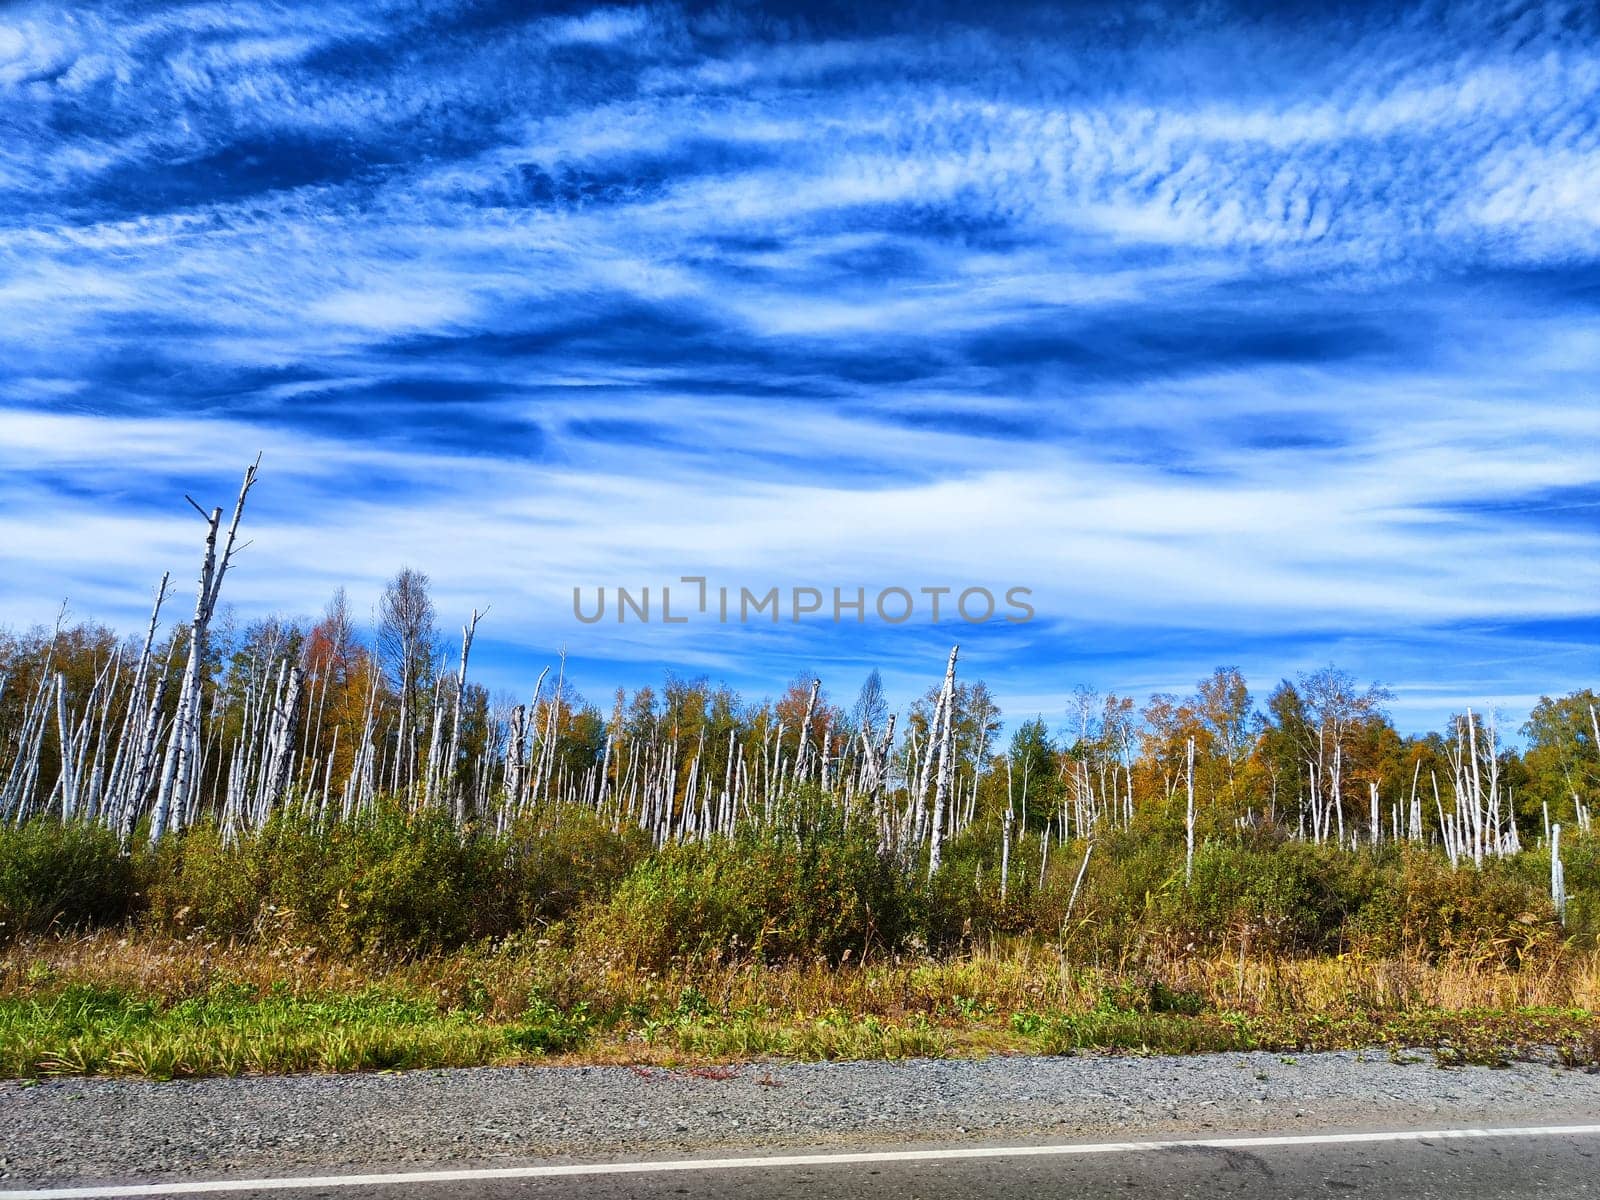 The view from the car window at the trunks of dead birches on the side of the road and blue sky with white clouds. Trees that died due to poor ecology and swamps. Views and travel experiences